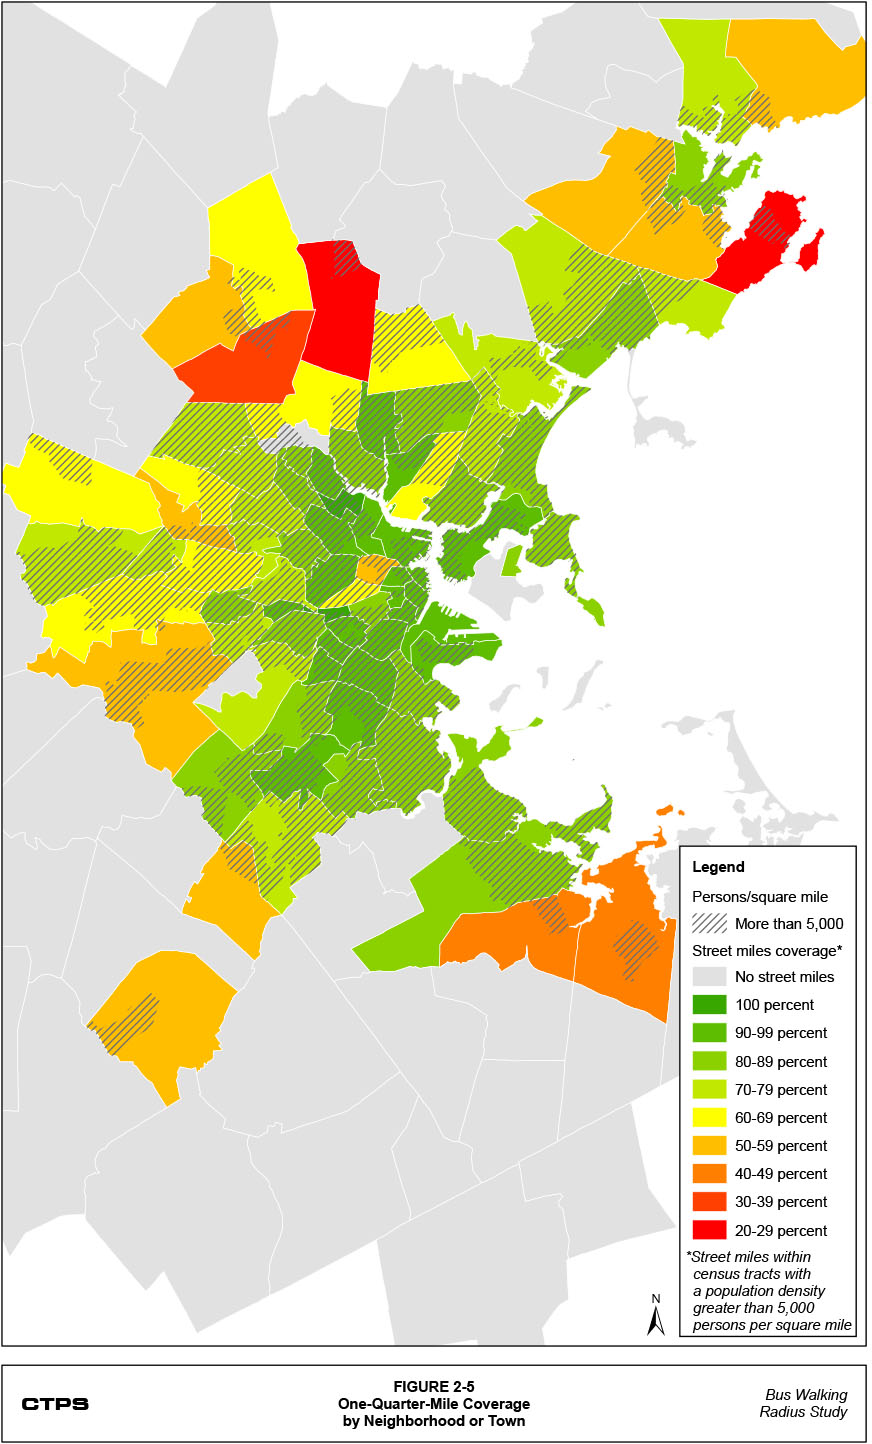 Figure 2-5: One-Quarter-Mile Coverage by Neighborhood or Town. This is a map that shows the location of census tracts with a population density greater than 5,000 persons per square mile. It also shows, for each town that has at least one of these census tracts, that town’s street mile coverage.